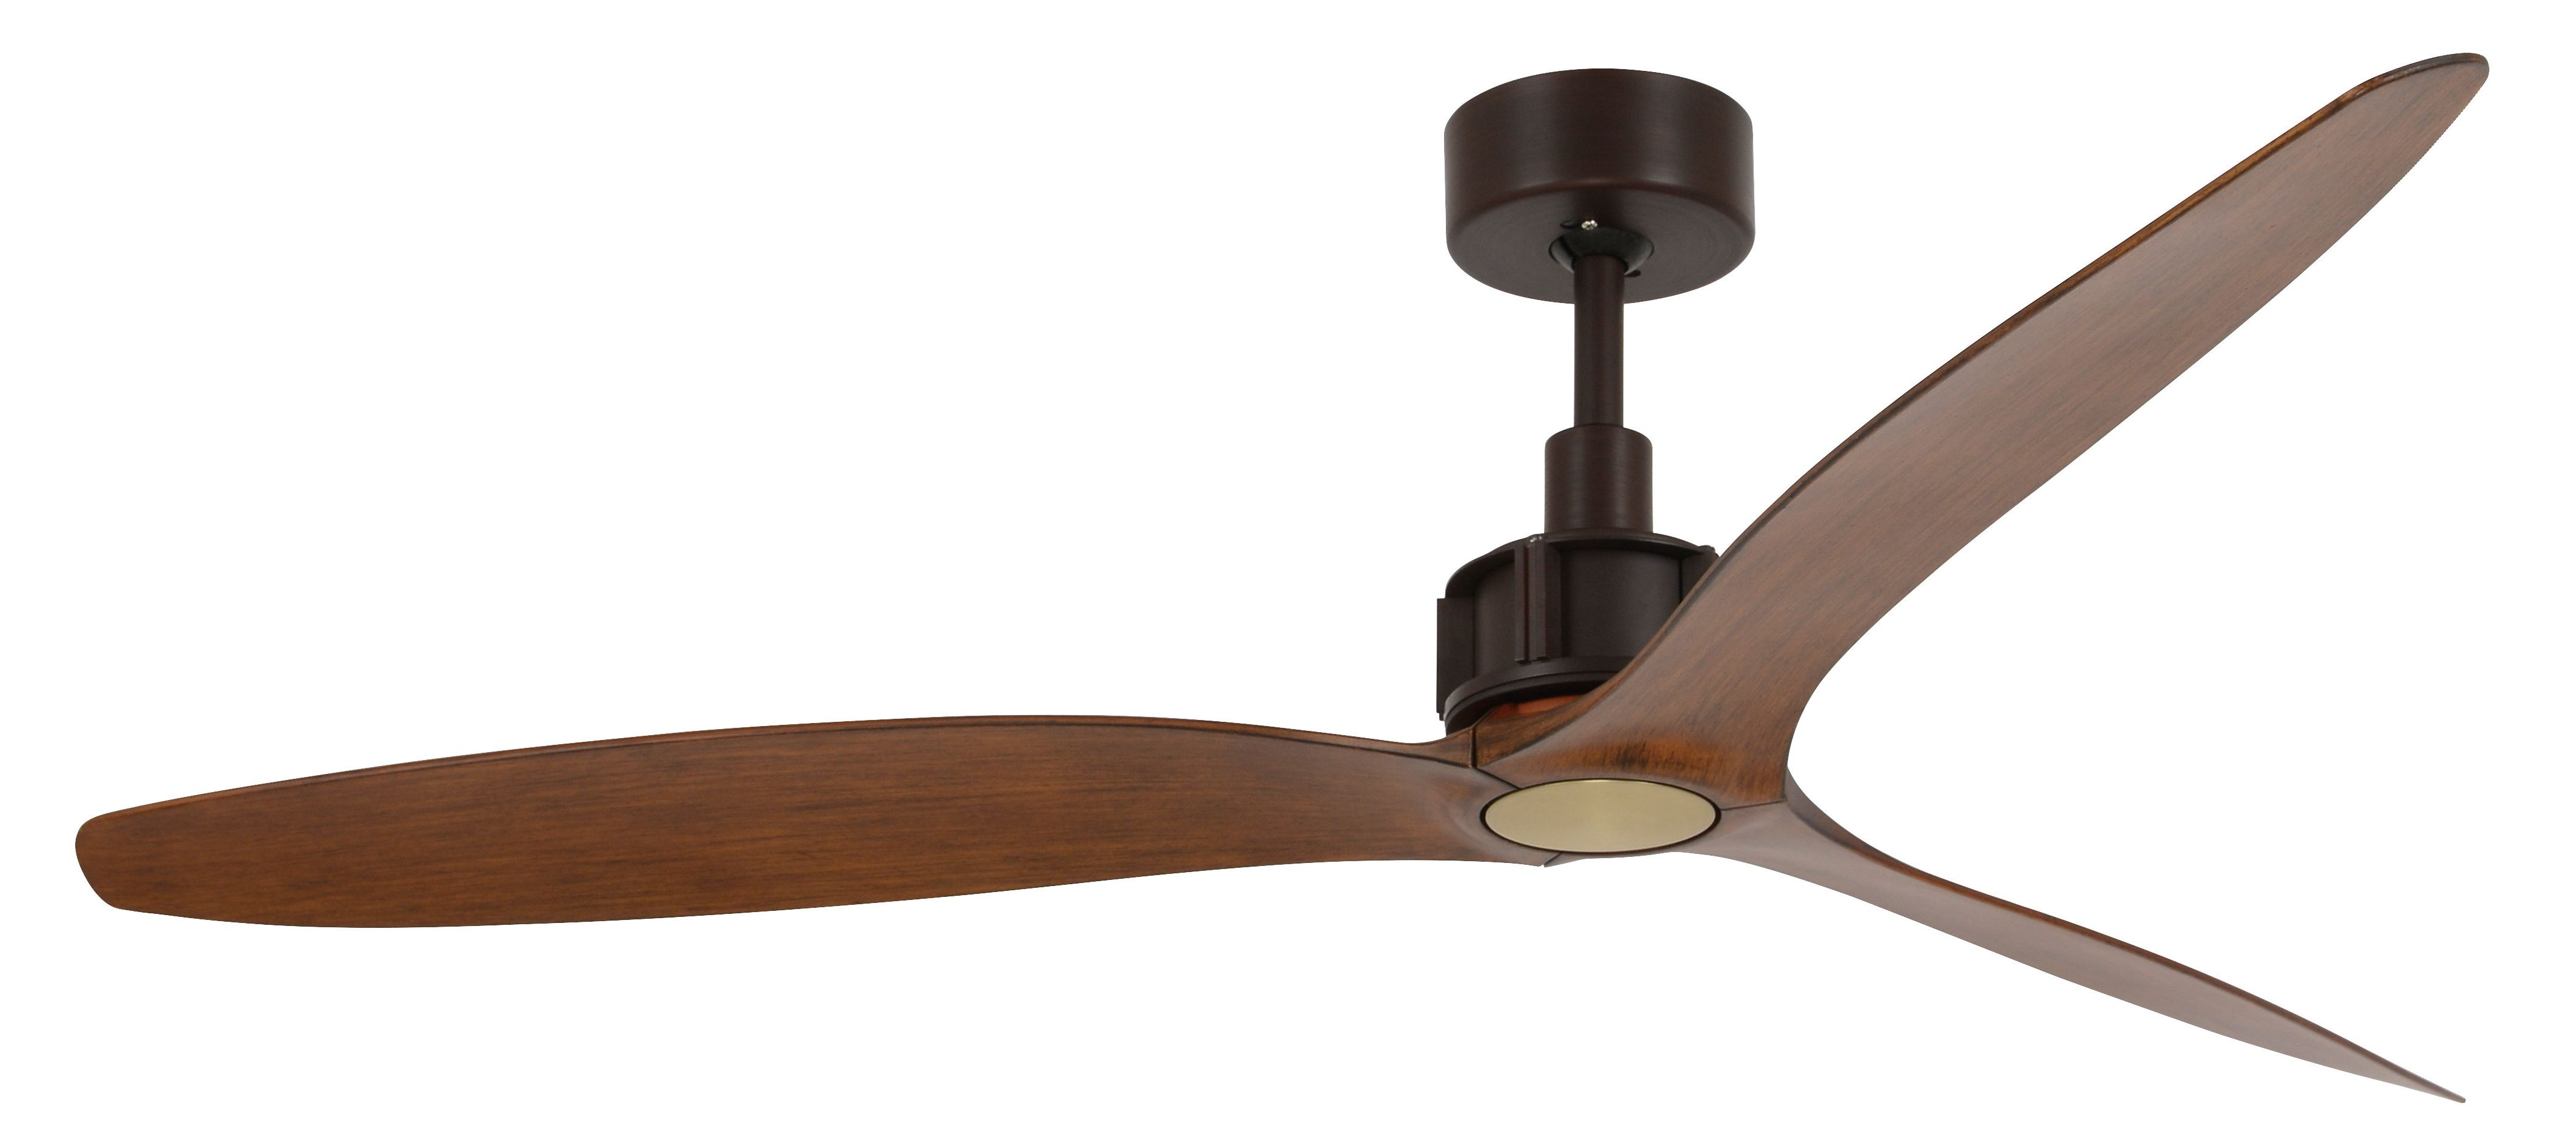 Fashionable Cedarton Hugger 5 Blade Led Ceiling Fans Pertaining To Modern Rustic Interiors Theron 52" Catoe 3 Blade Ceiling Fan With Remote (View 14 of 20)